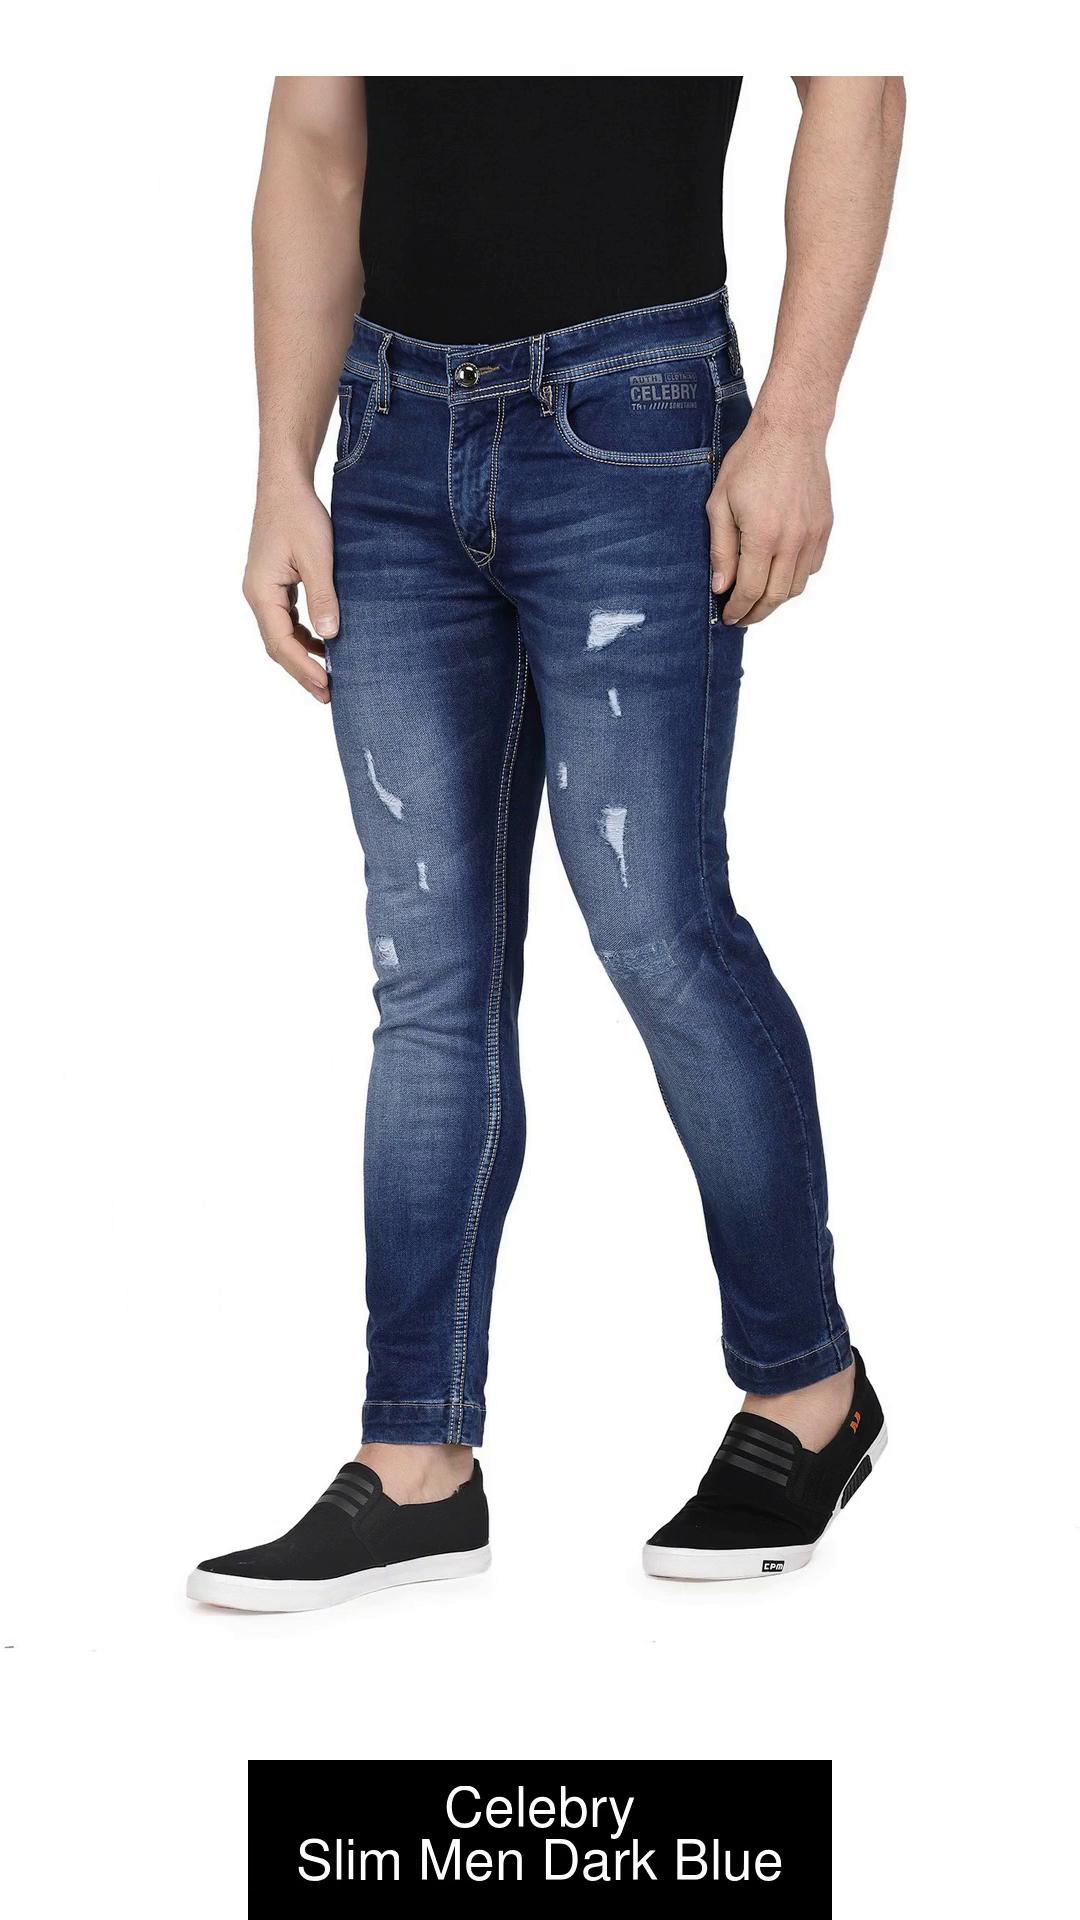 Lucky Brand Solid Blue Jeans 28 Waist - 68% off